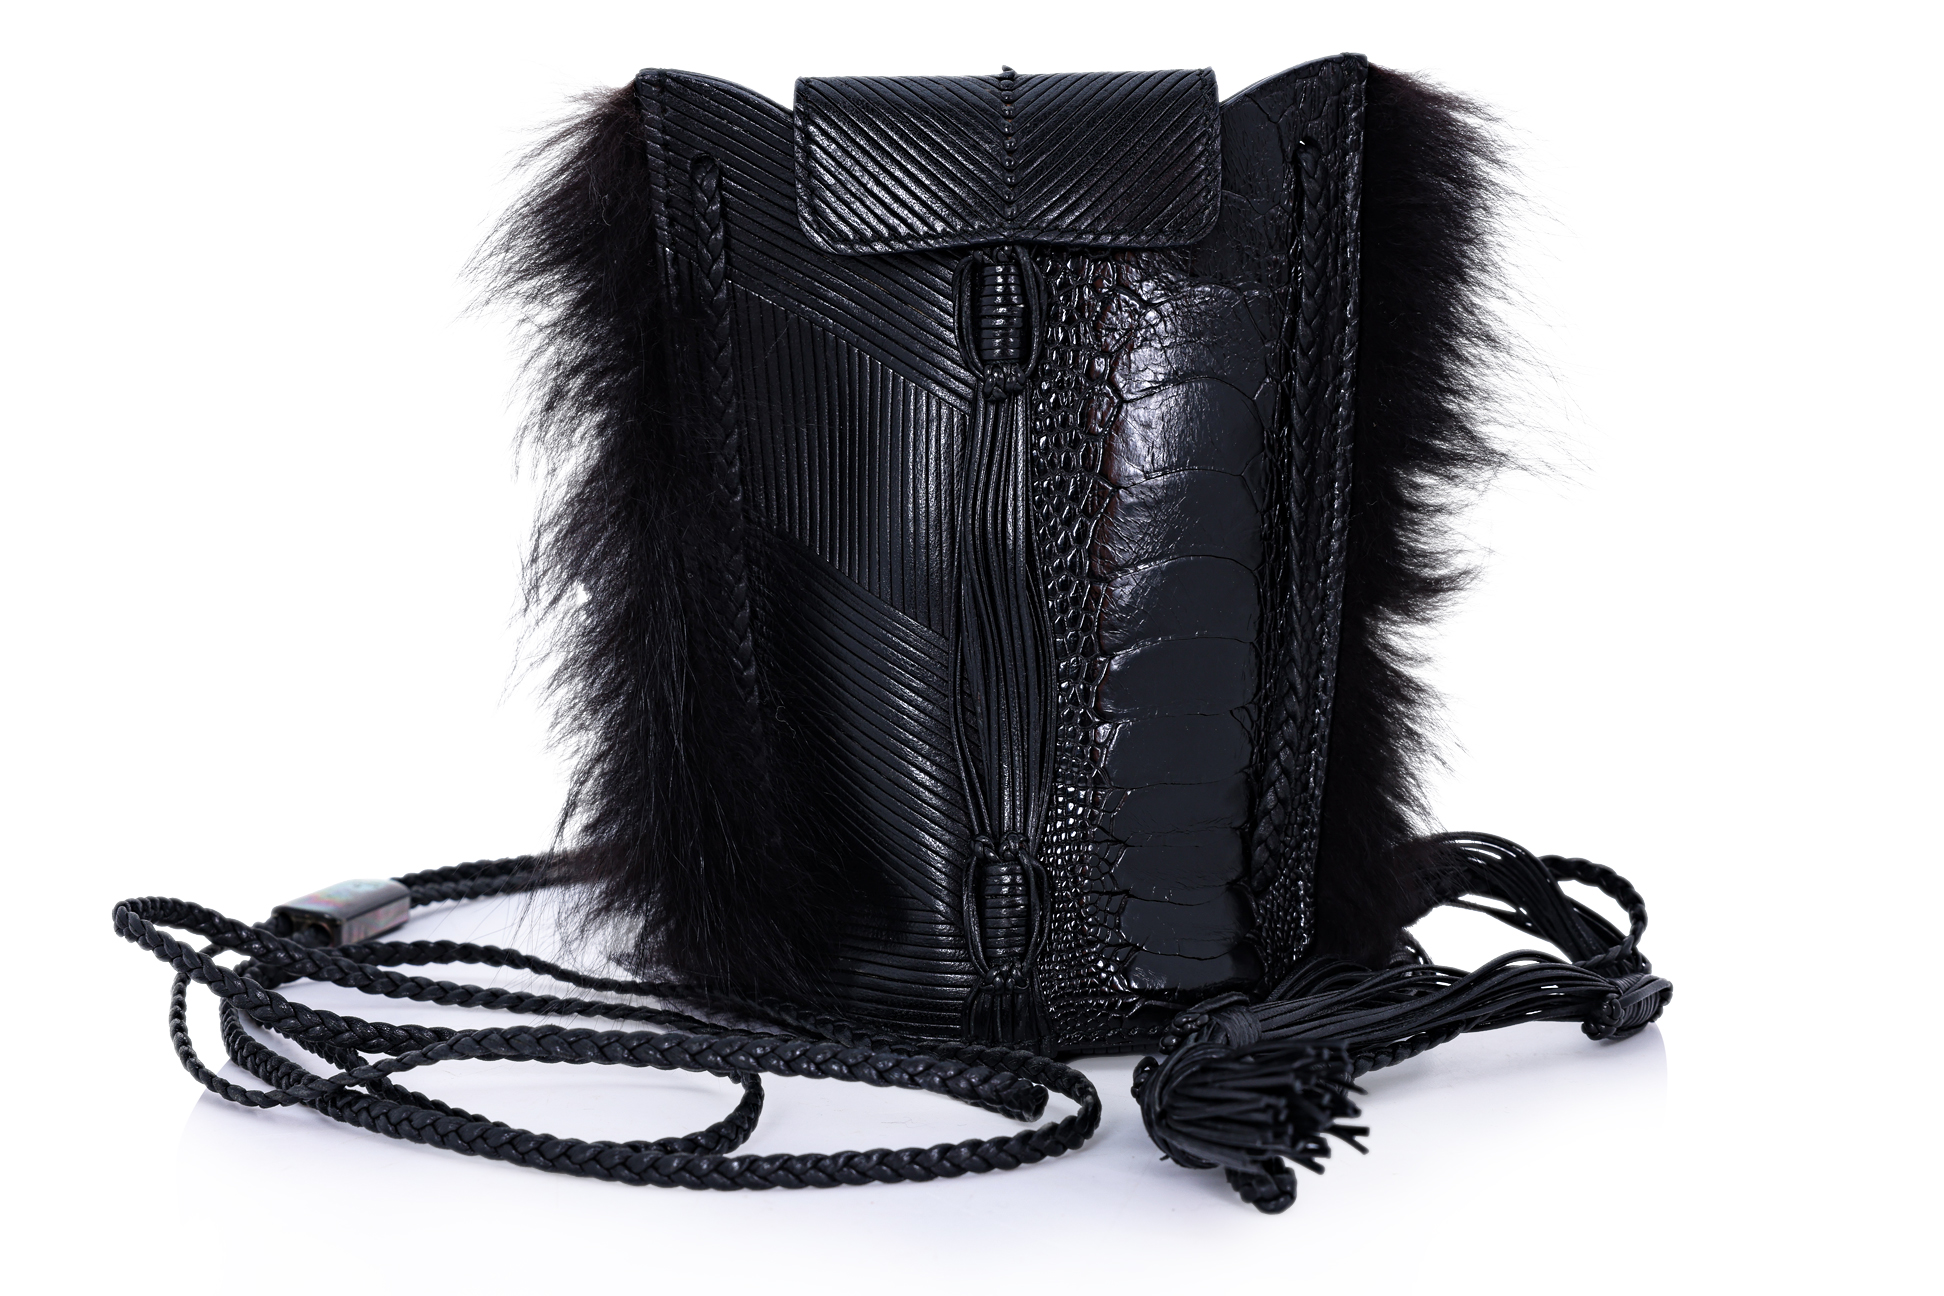 A GUCCI LEATHER EMBOSSED HANDBAG WITH FUR DETAILING - Image 2 of 4